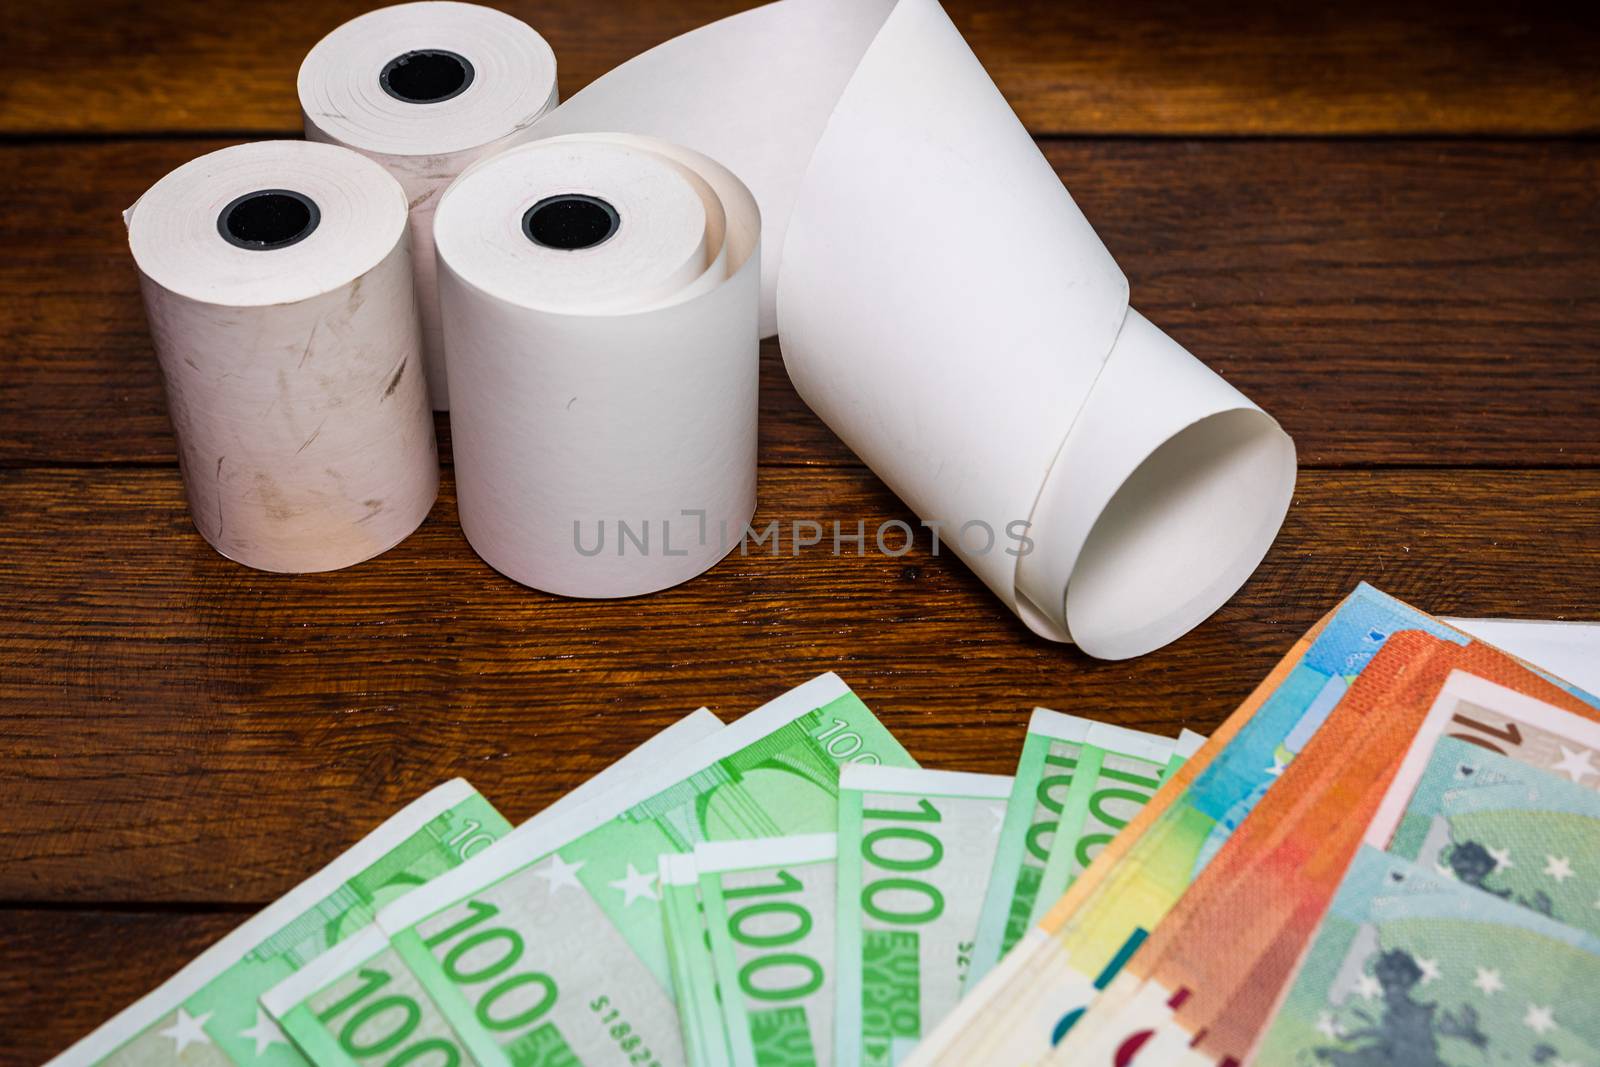 Roll of cash register tape and money isolated on table. Planning savings, spending money or business concept.